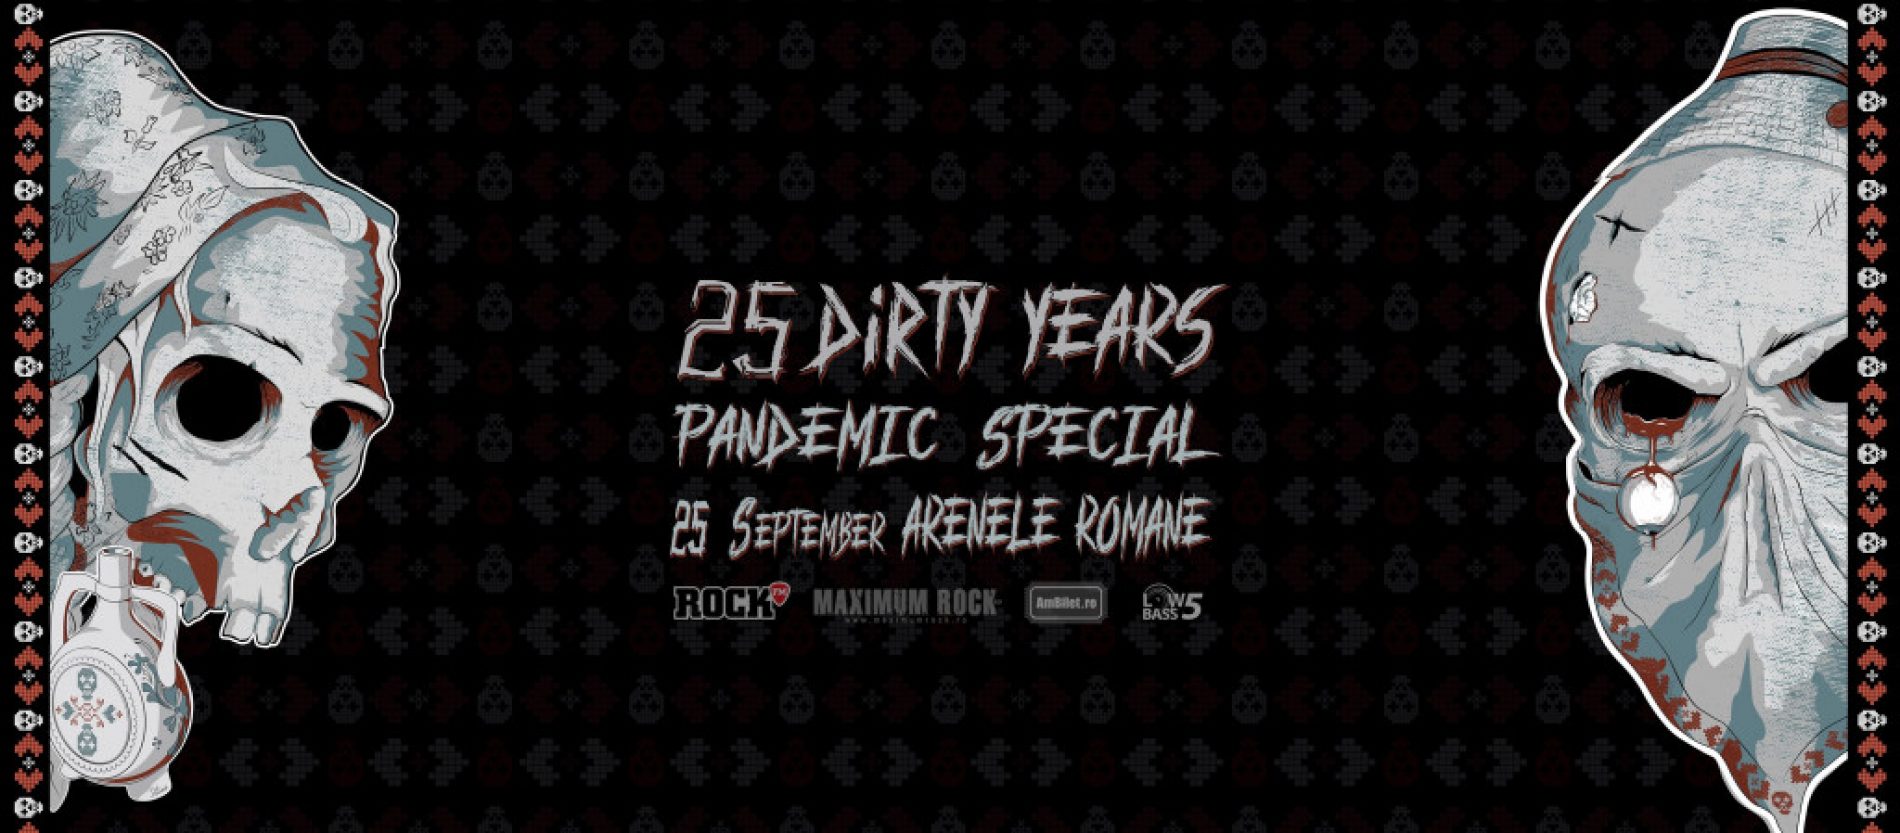 Galerie foto concert Dirty Shirt: 25 Dirty Years – Pandemic Special la Arenele Romane